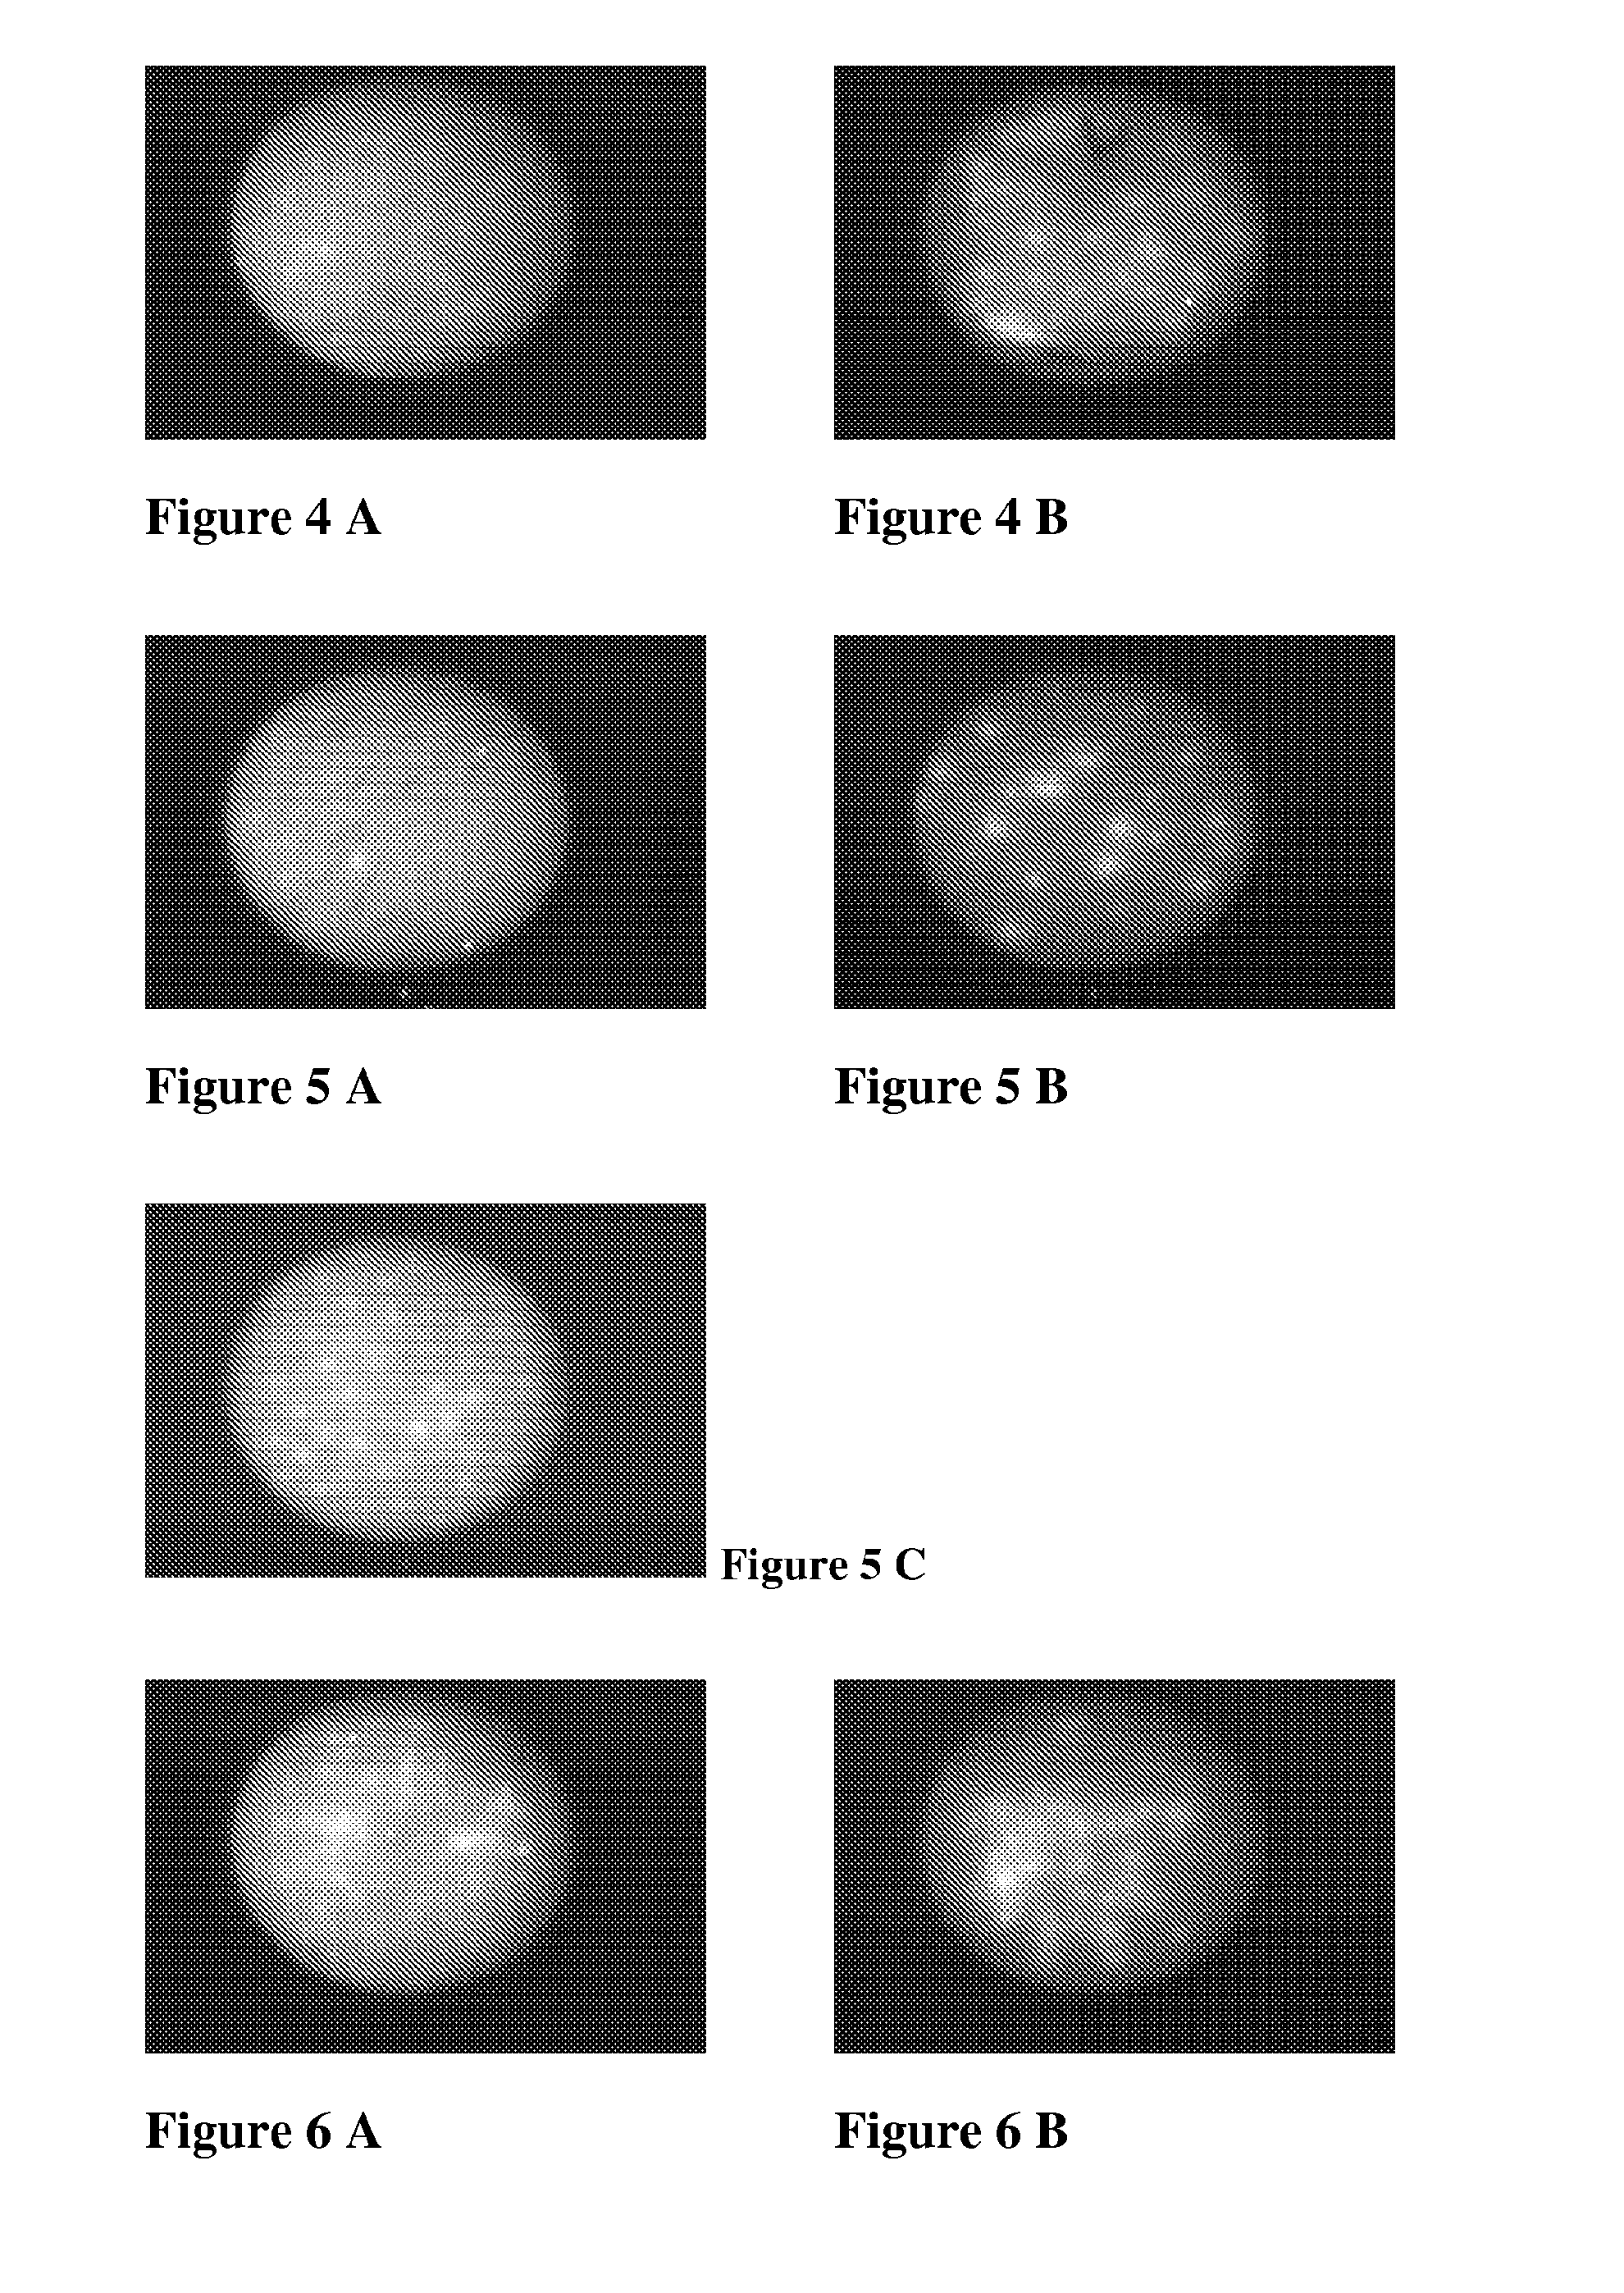 Novel compounds useful in therapeutic and cosmetic methods